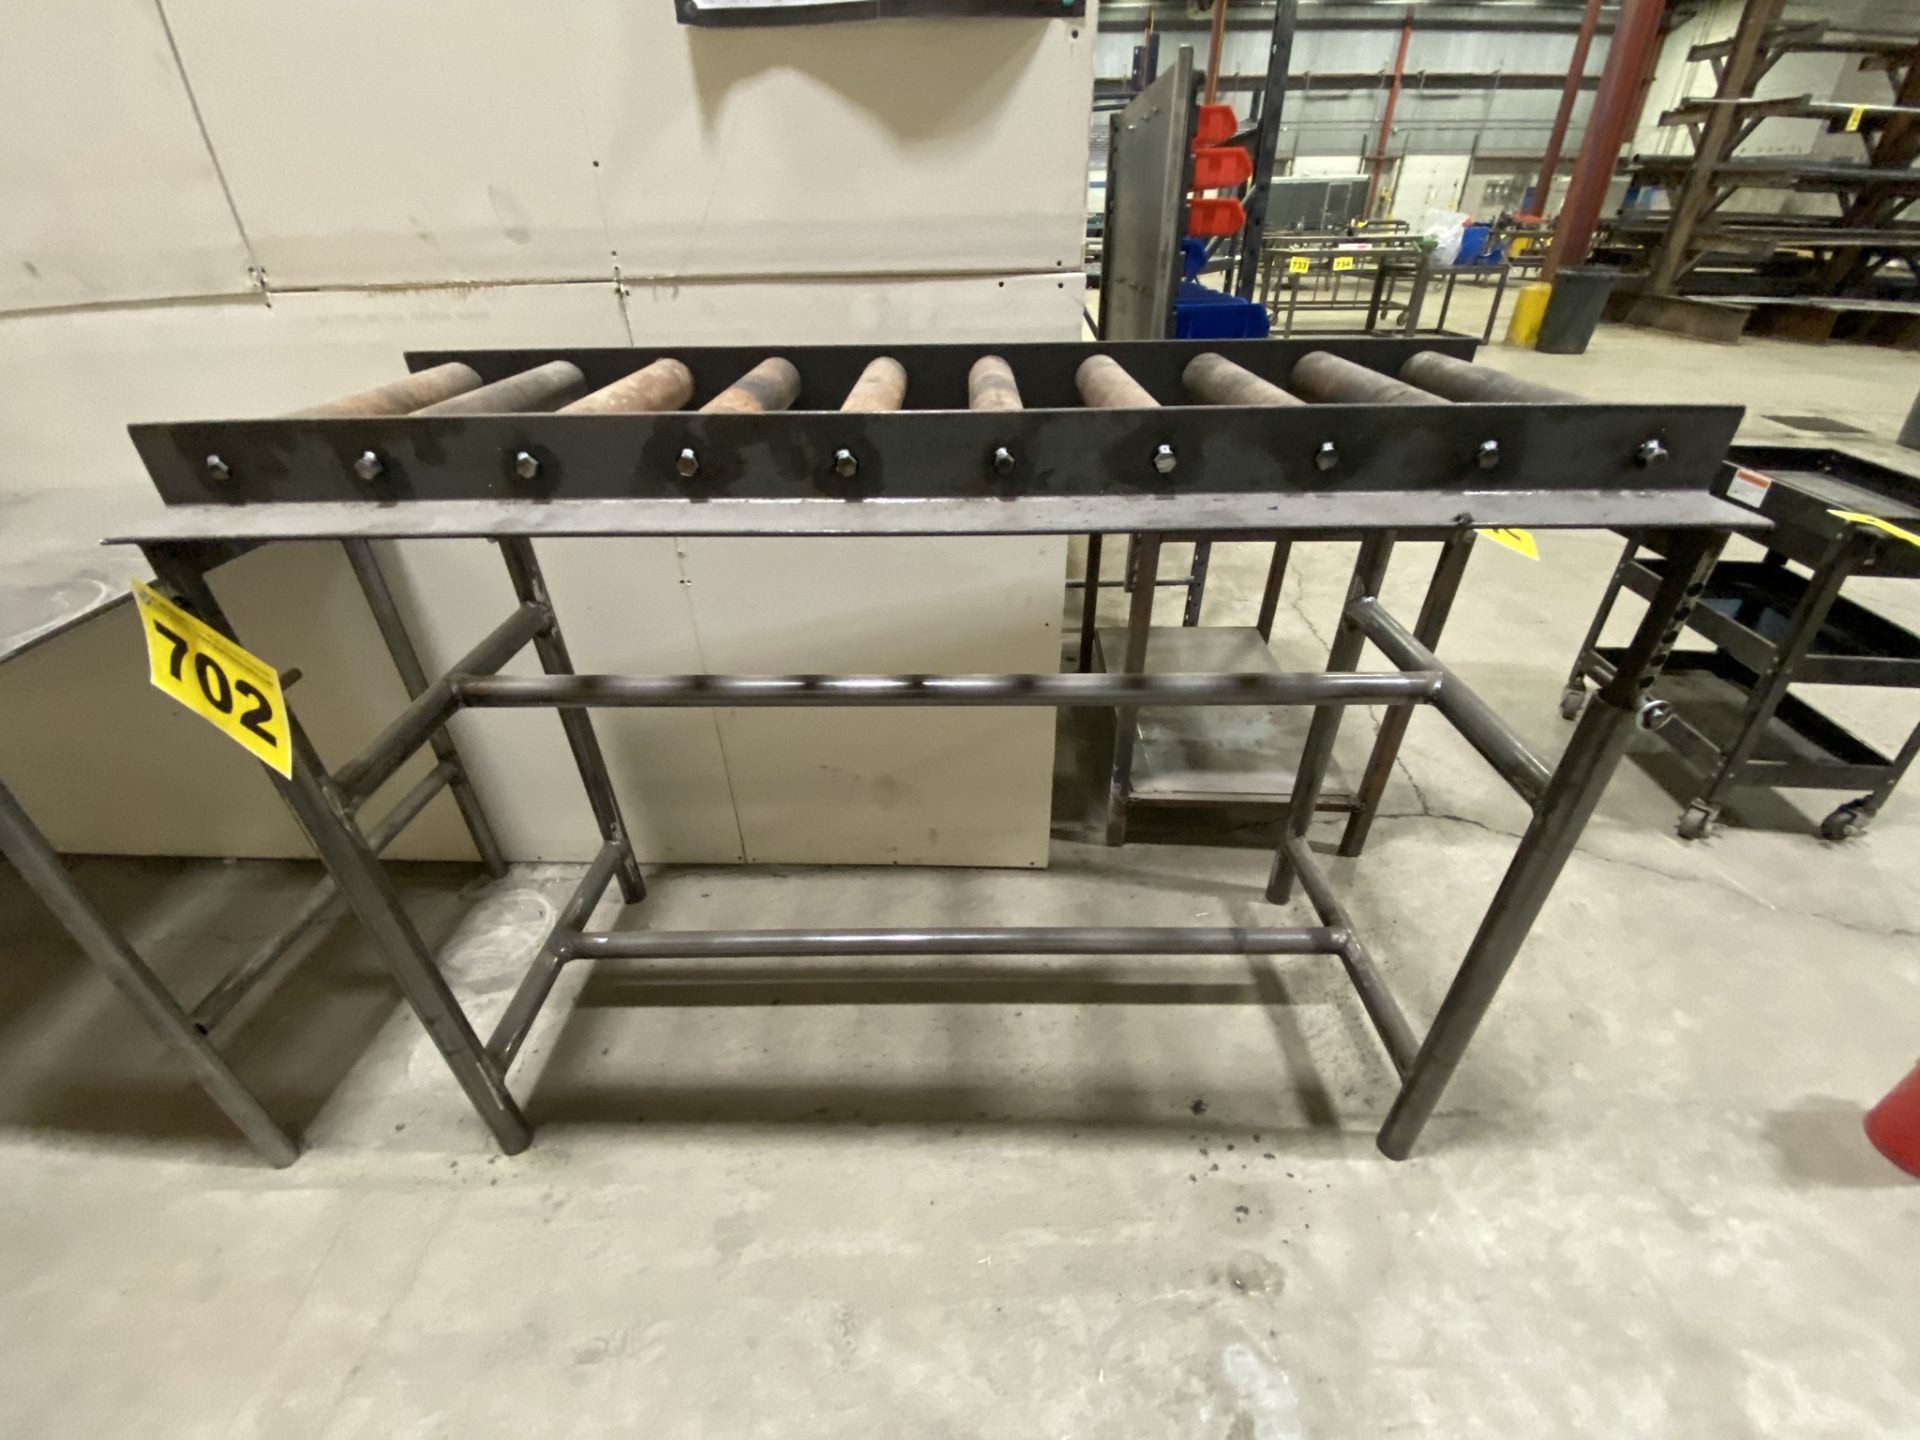 STEEL, ROLLER INFEED CONVEYOR WITH ADJUSTABLE INCLINE, 5' X 2' X 36" (L,W,H), 48" HEIGHT MAXIMUM